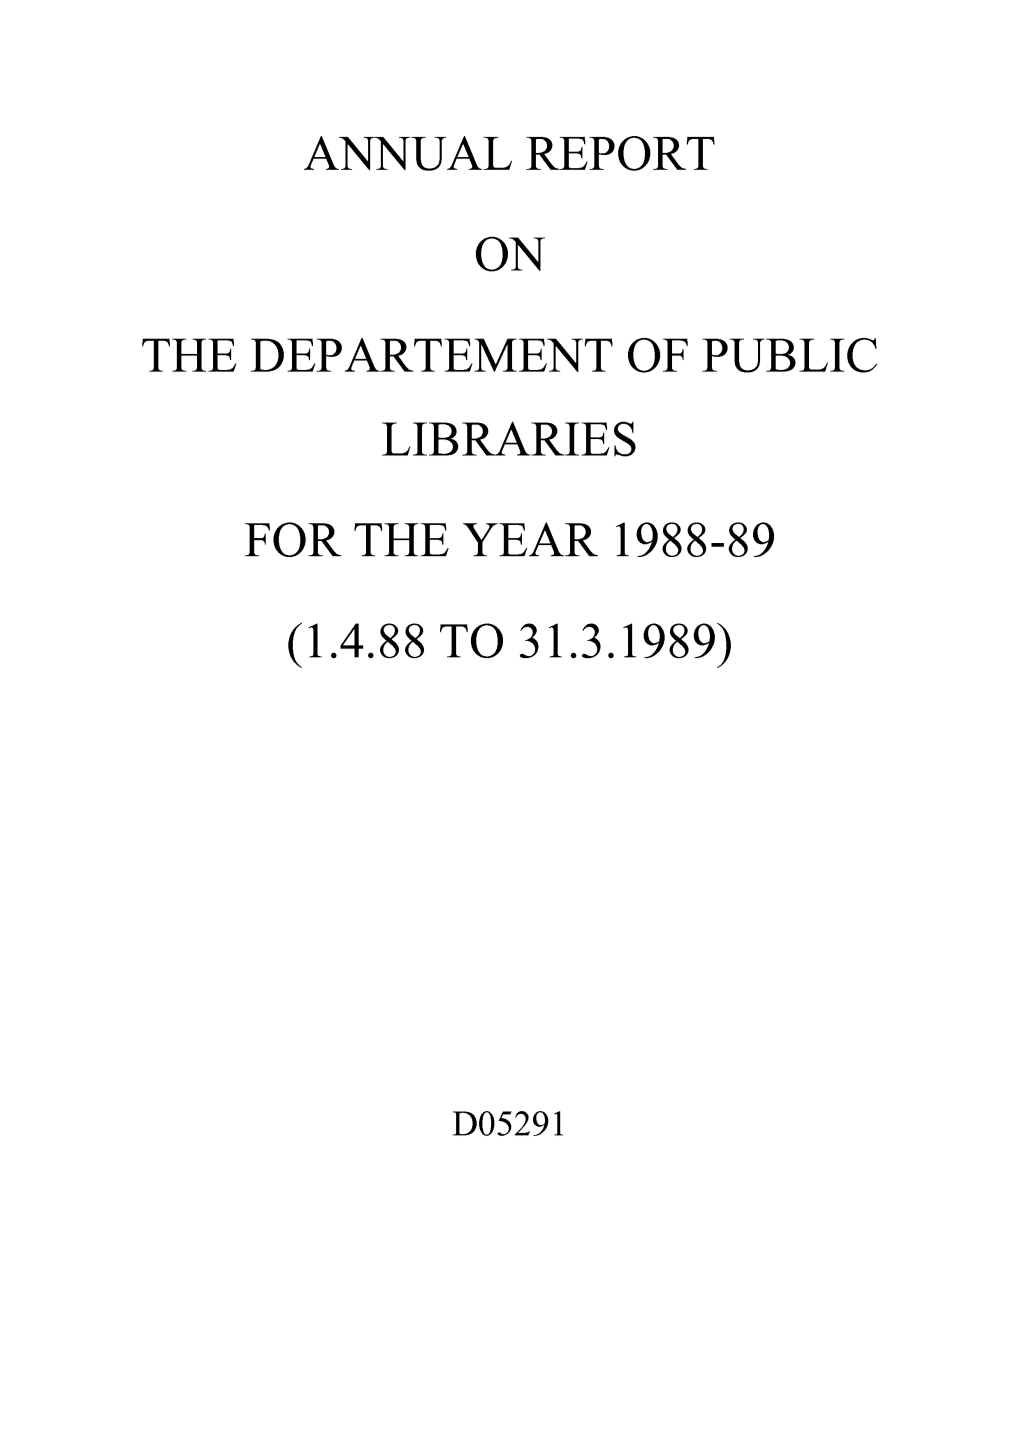 Annual Report on the Departement of Public